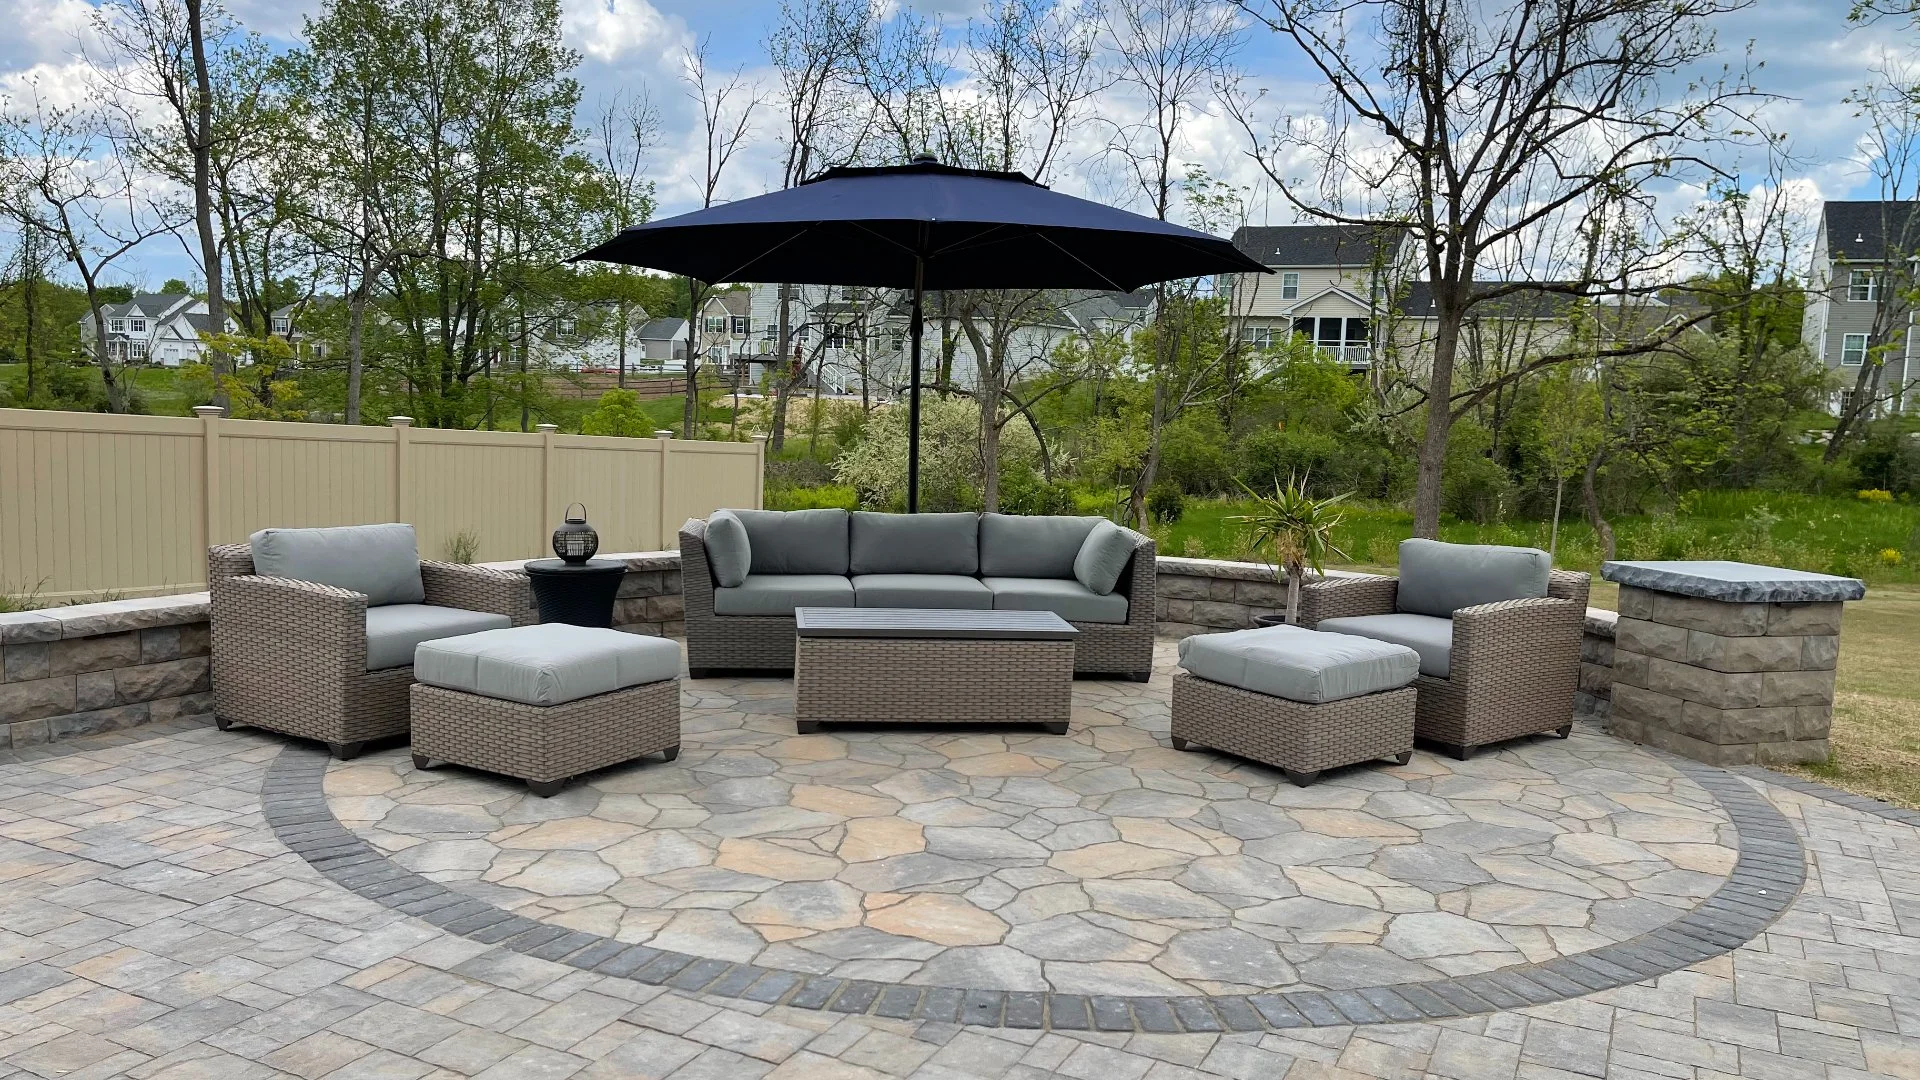 3 Things to Consider When Installing a Patio in Your Outdoor Living Space